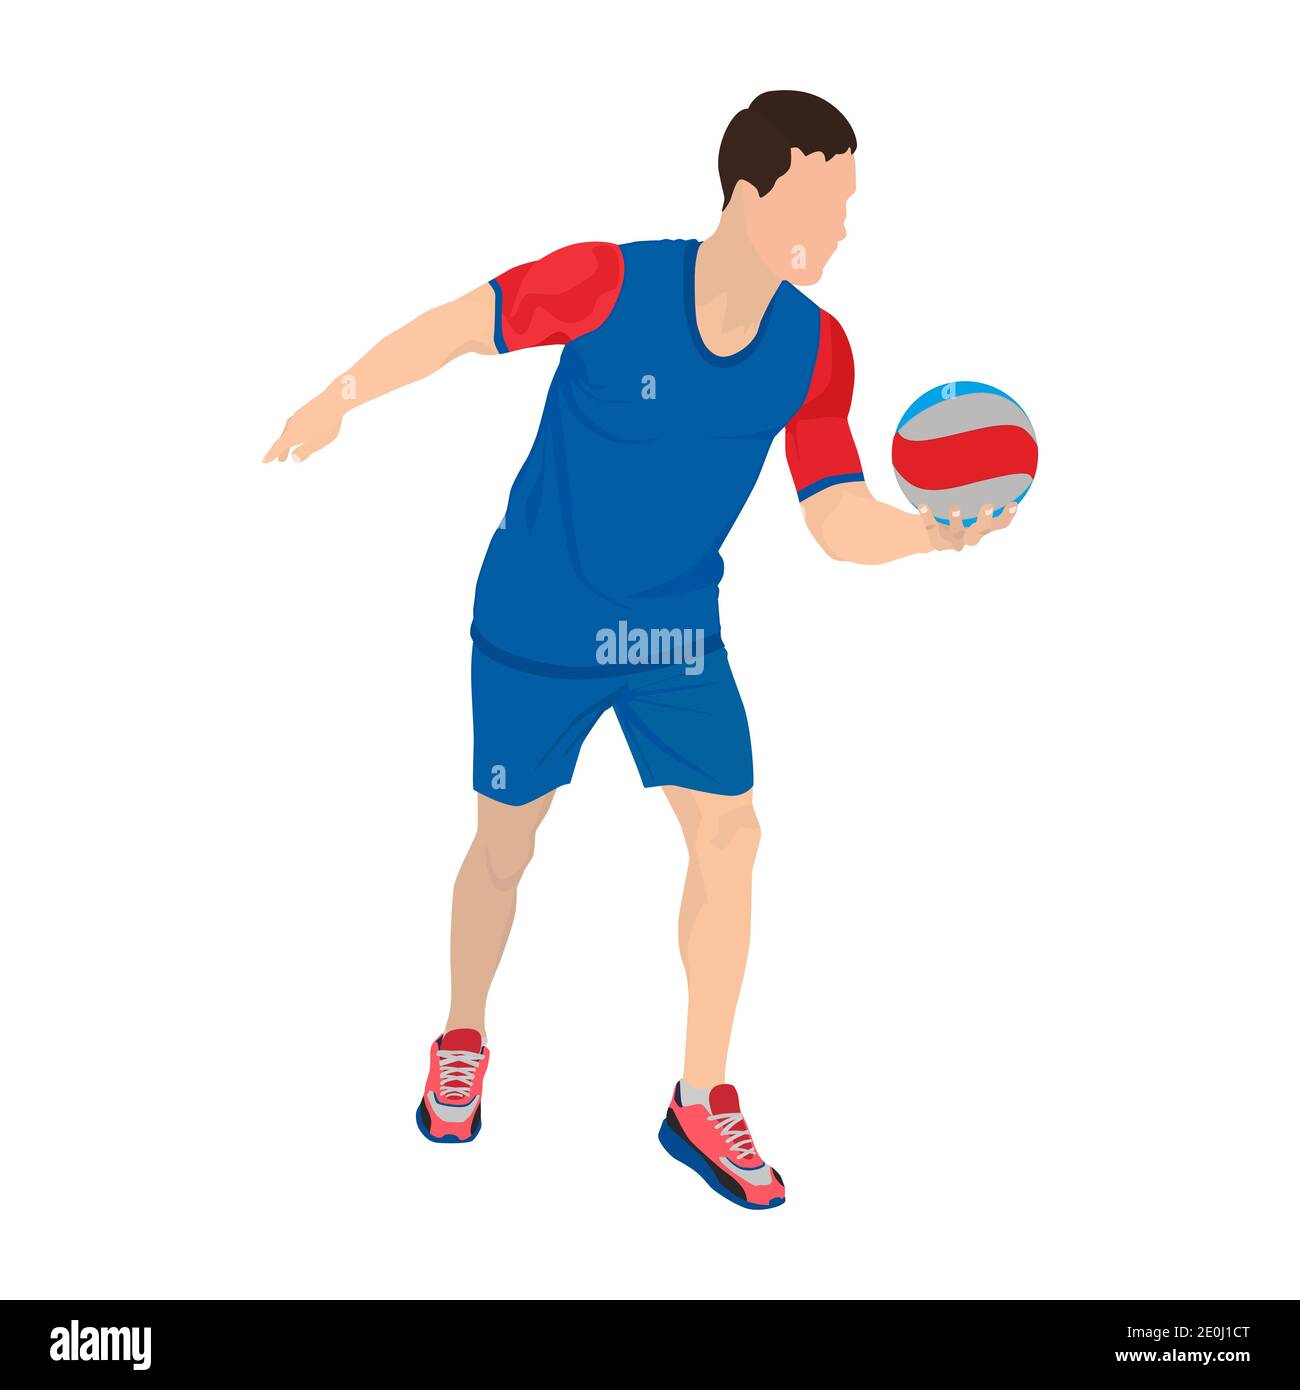 Professional volleyball player serving the ball, vector illustration Stock Vector